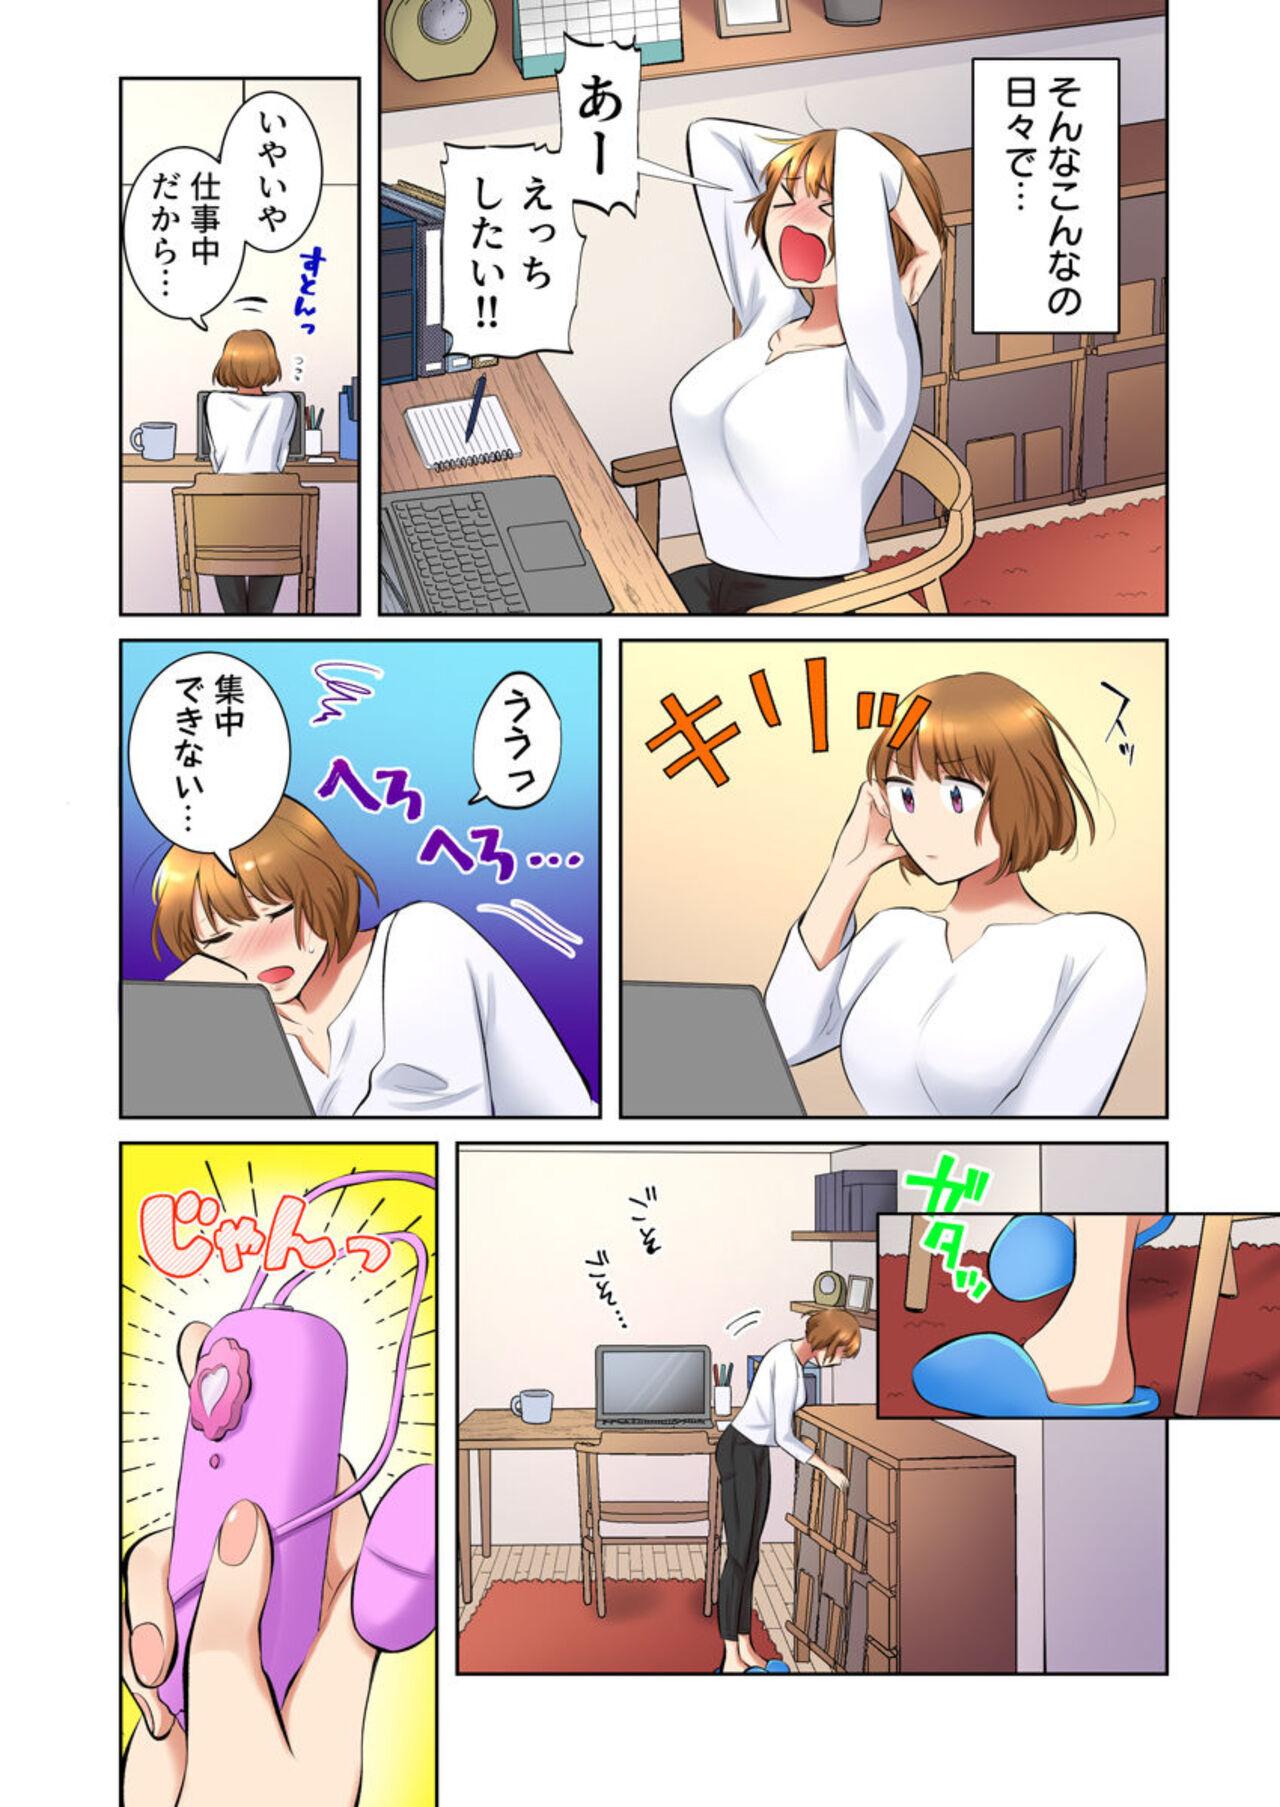 Ball Busting [Ika Hotaru] My Neighbor Is A Sadistic Ex-Boyfriend ~I Love My Husband, But My Aching Body Has Been Redeveloped~ (Full Color) 2 Australian - Page 11